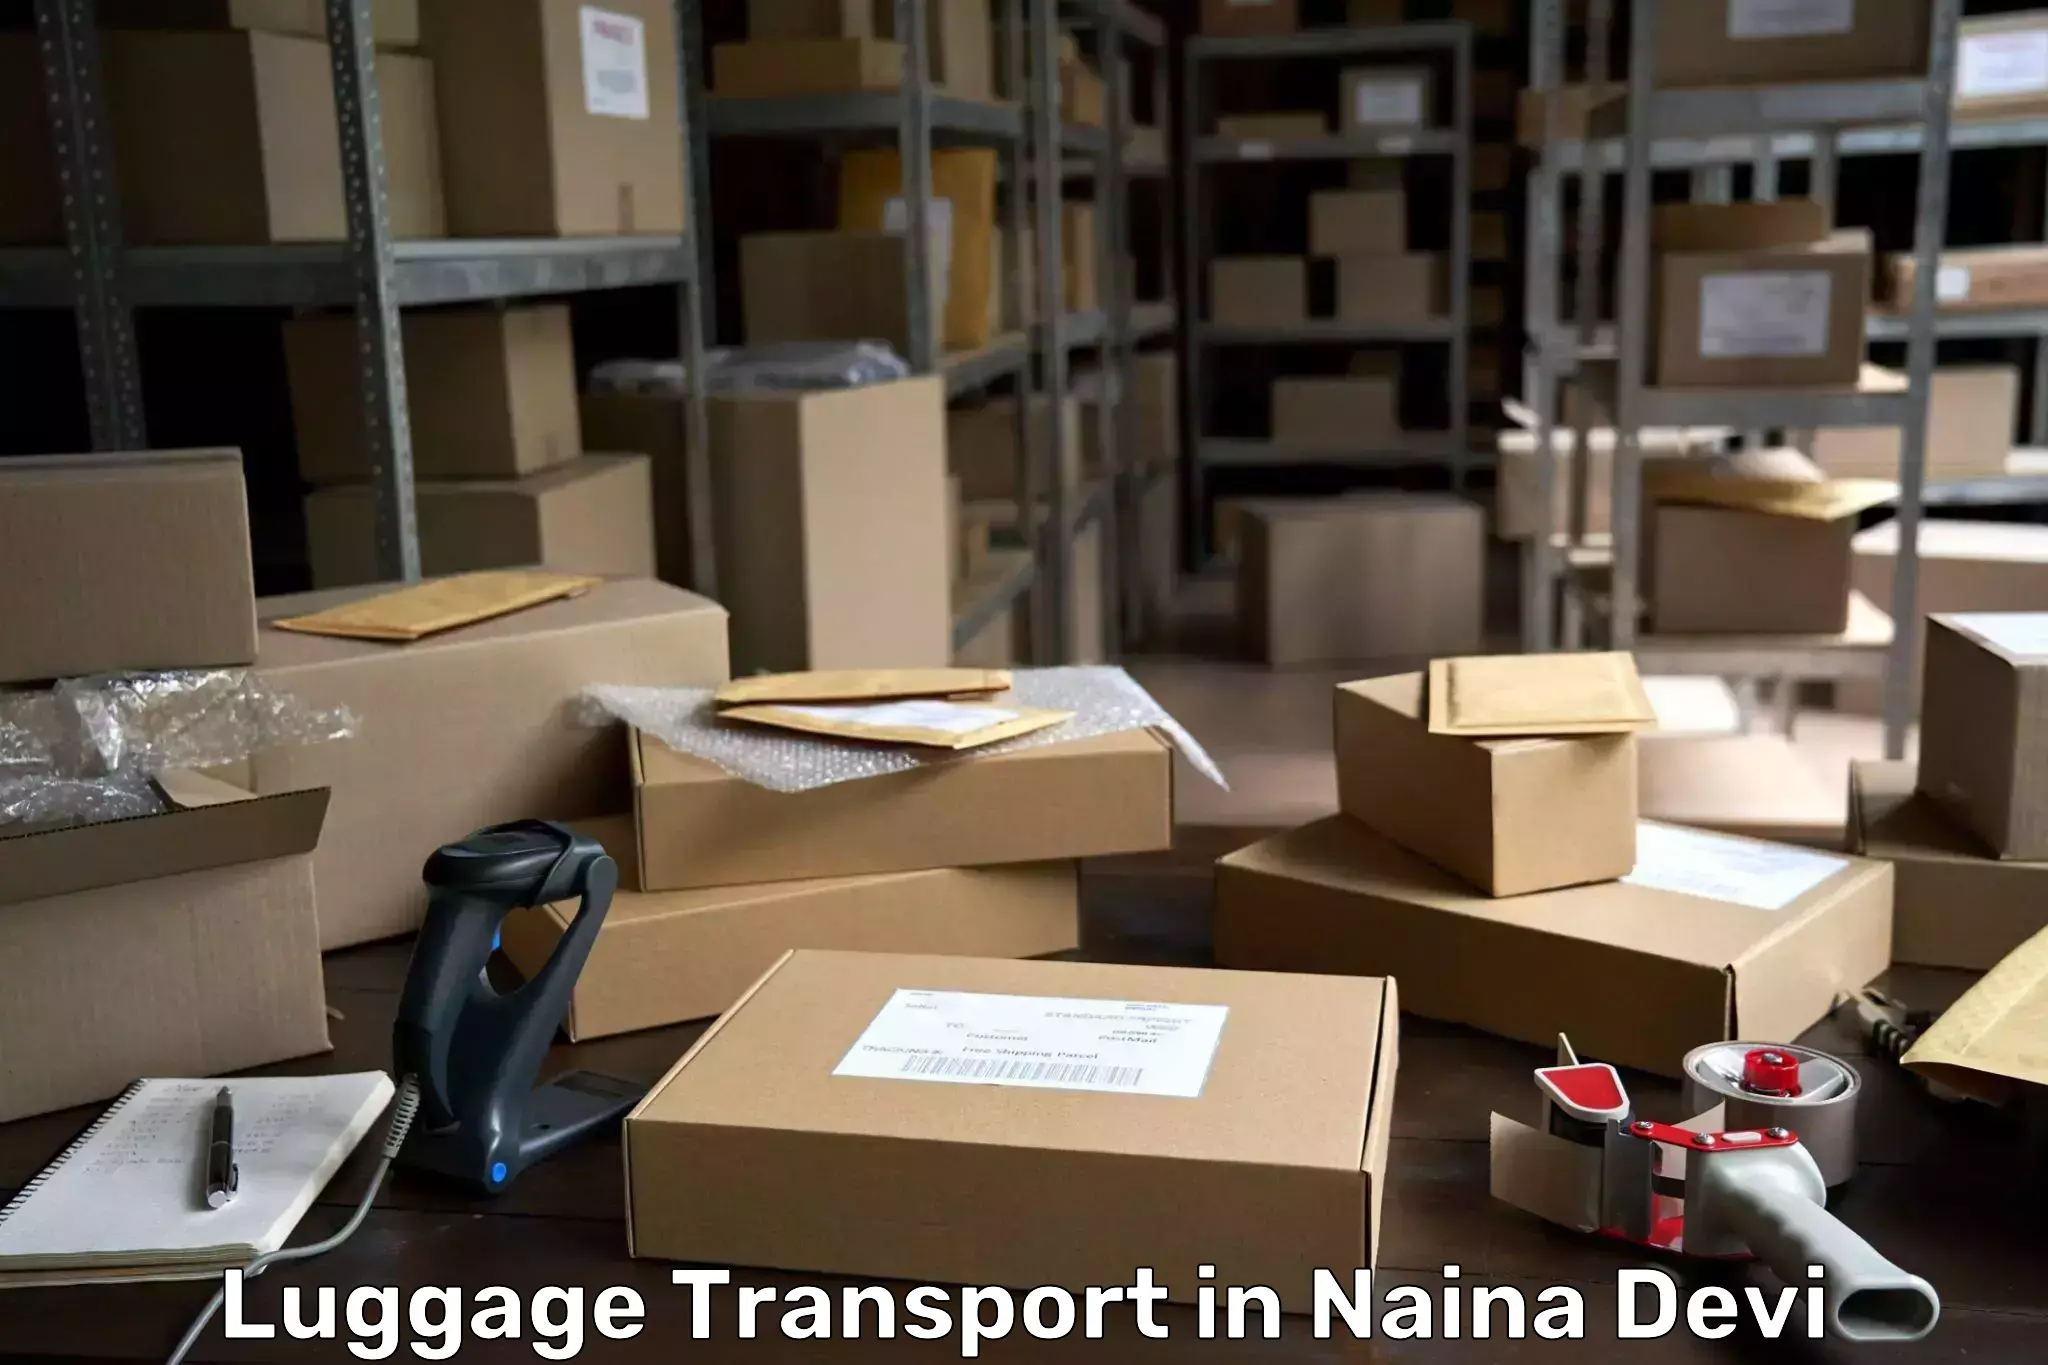 Luggage transport consultancy in Naina Devi